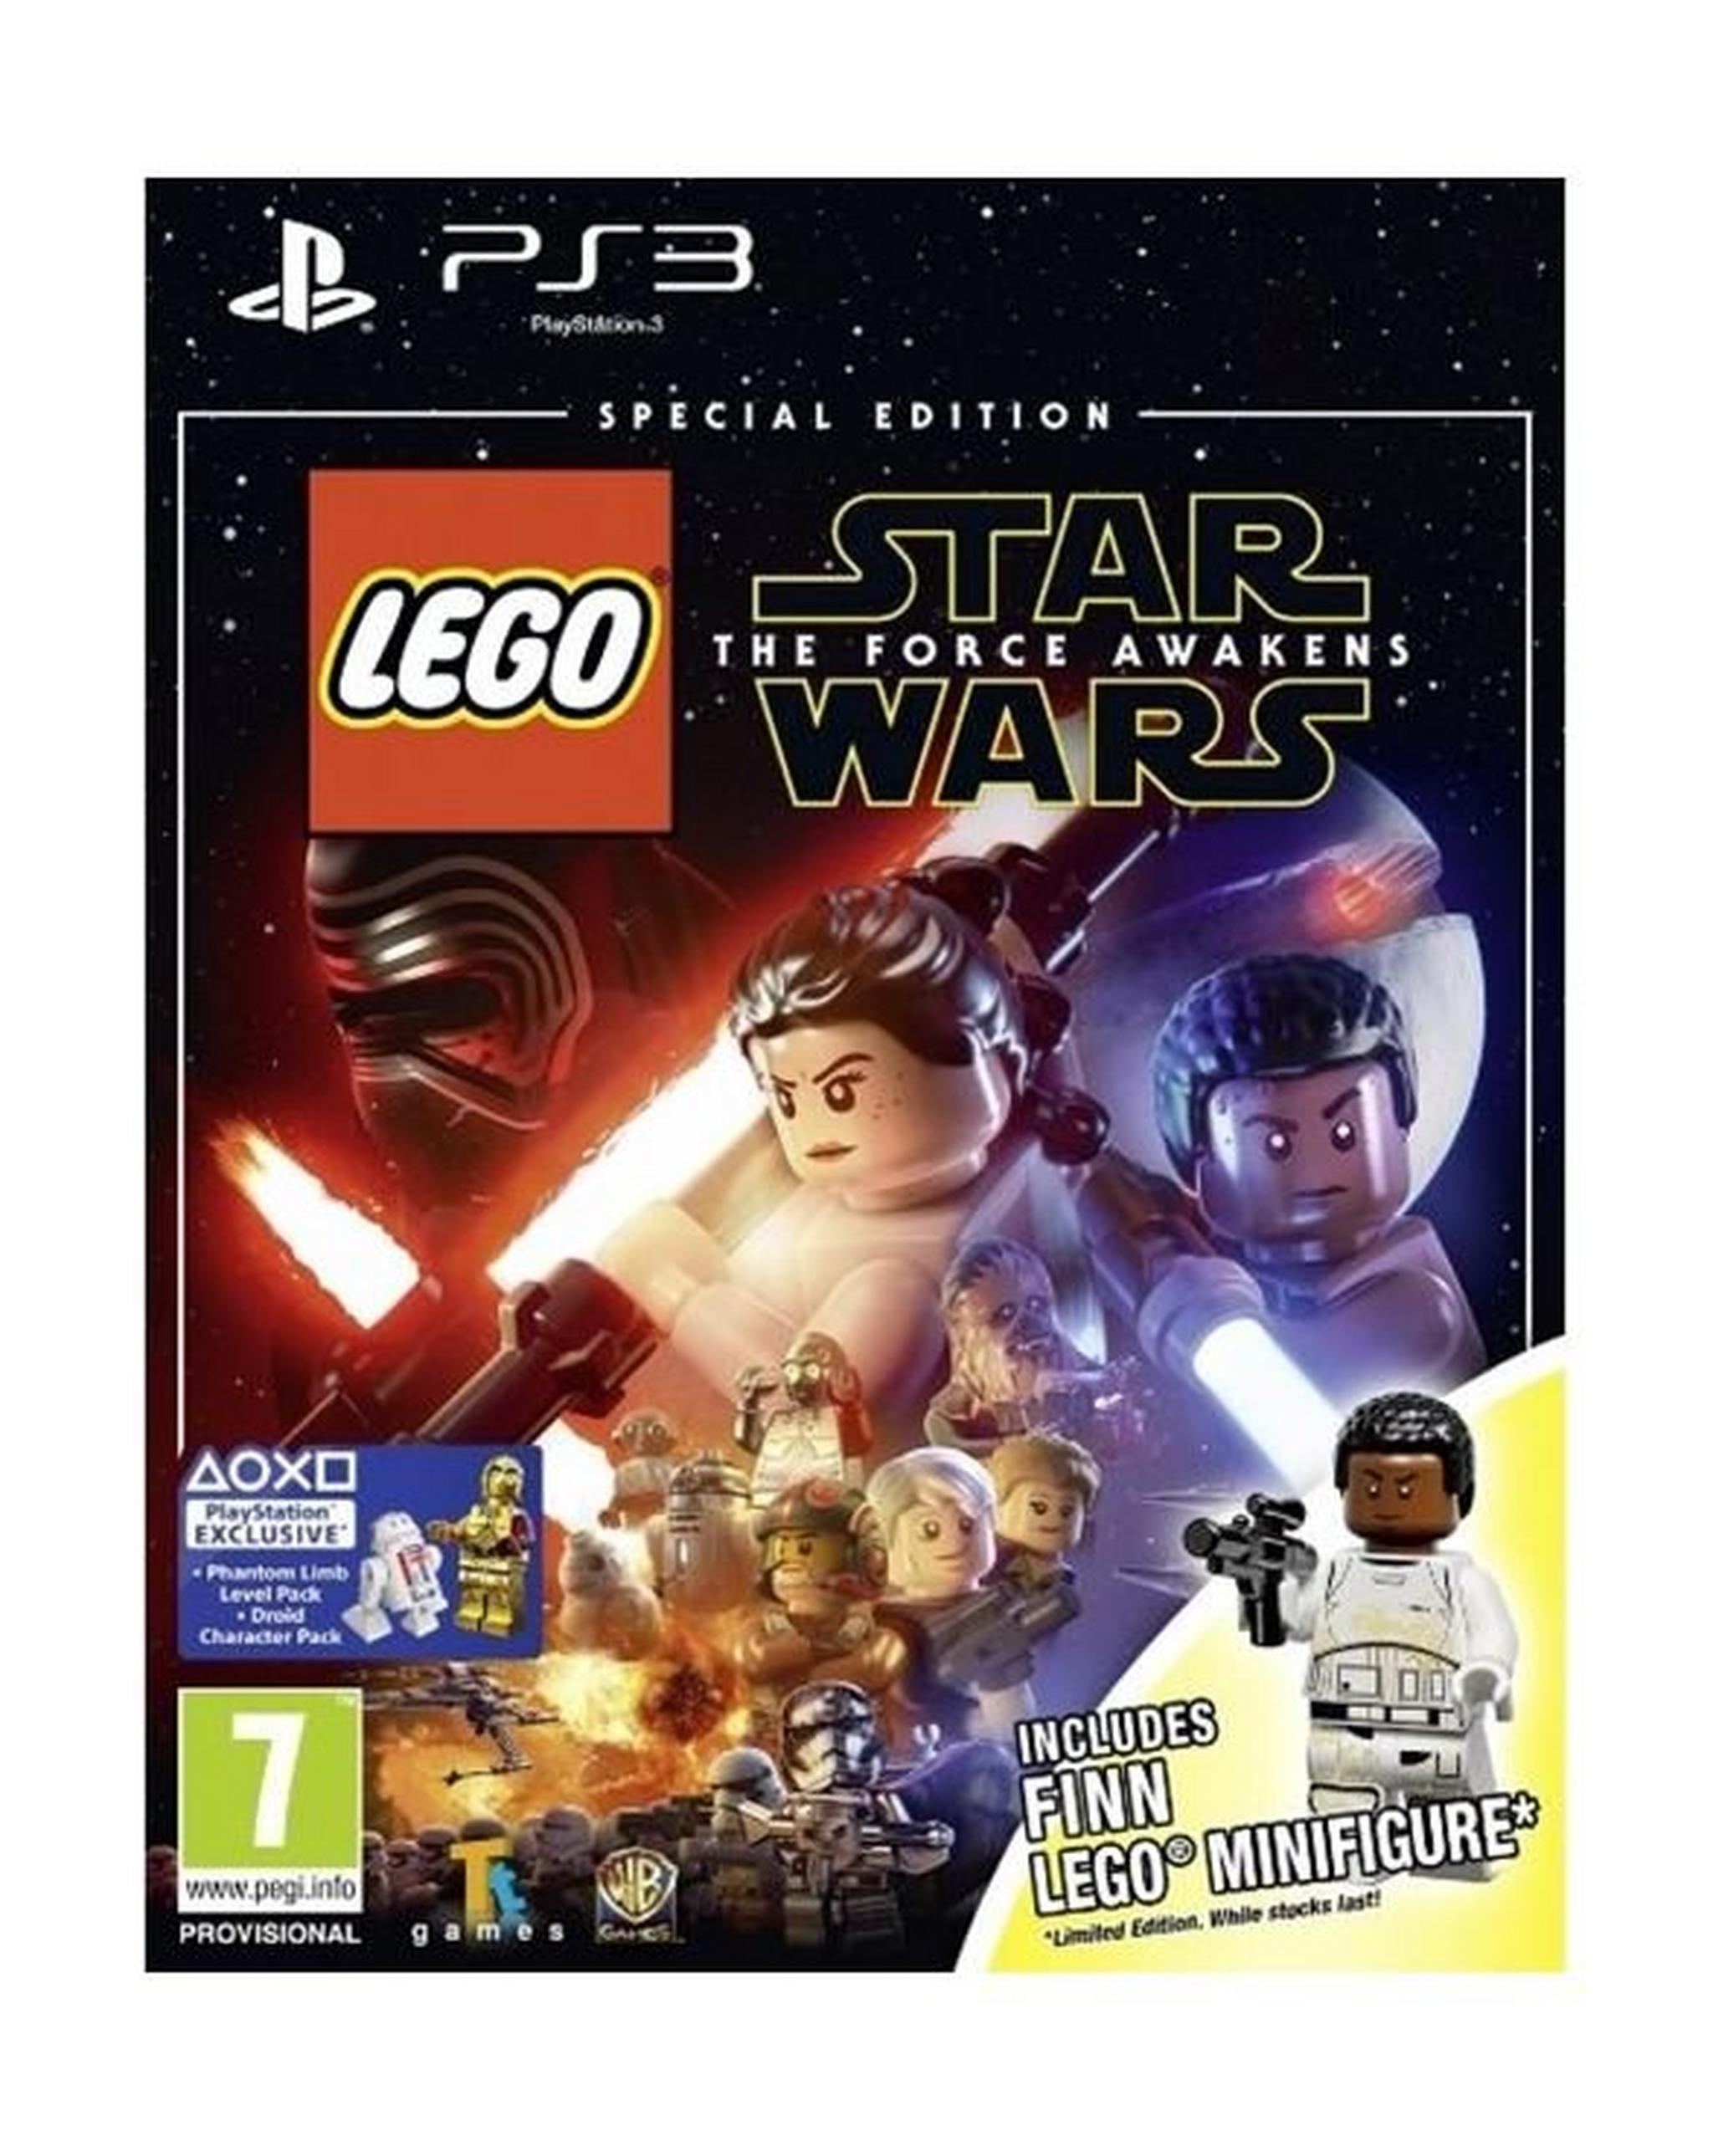 Lego Star Wars: The Force Awakens with X-wing Mini Figure - PlayStation 3 Game